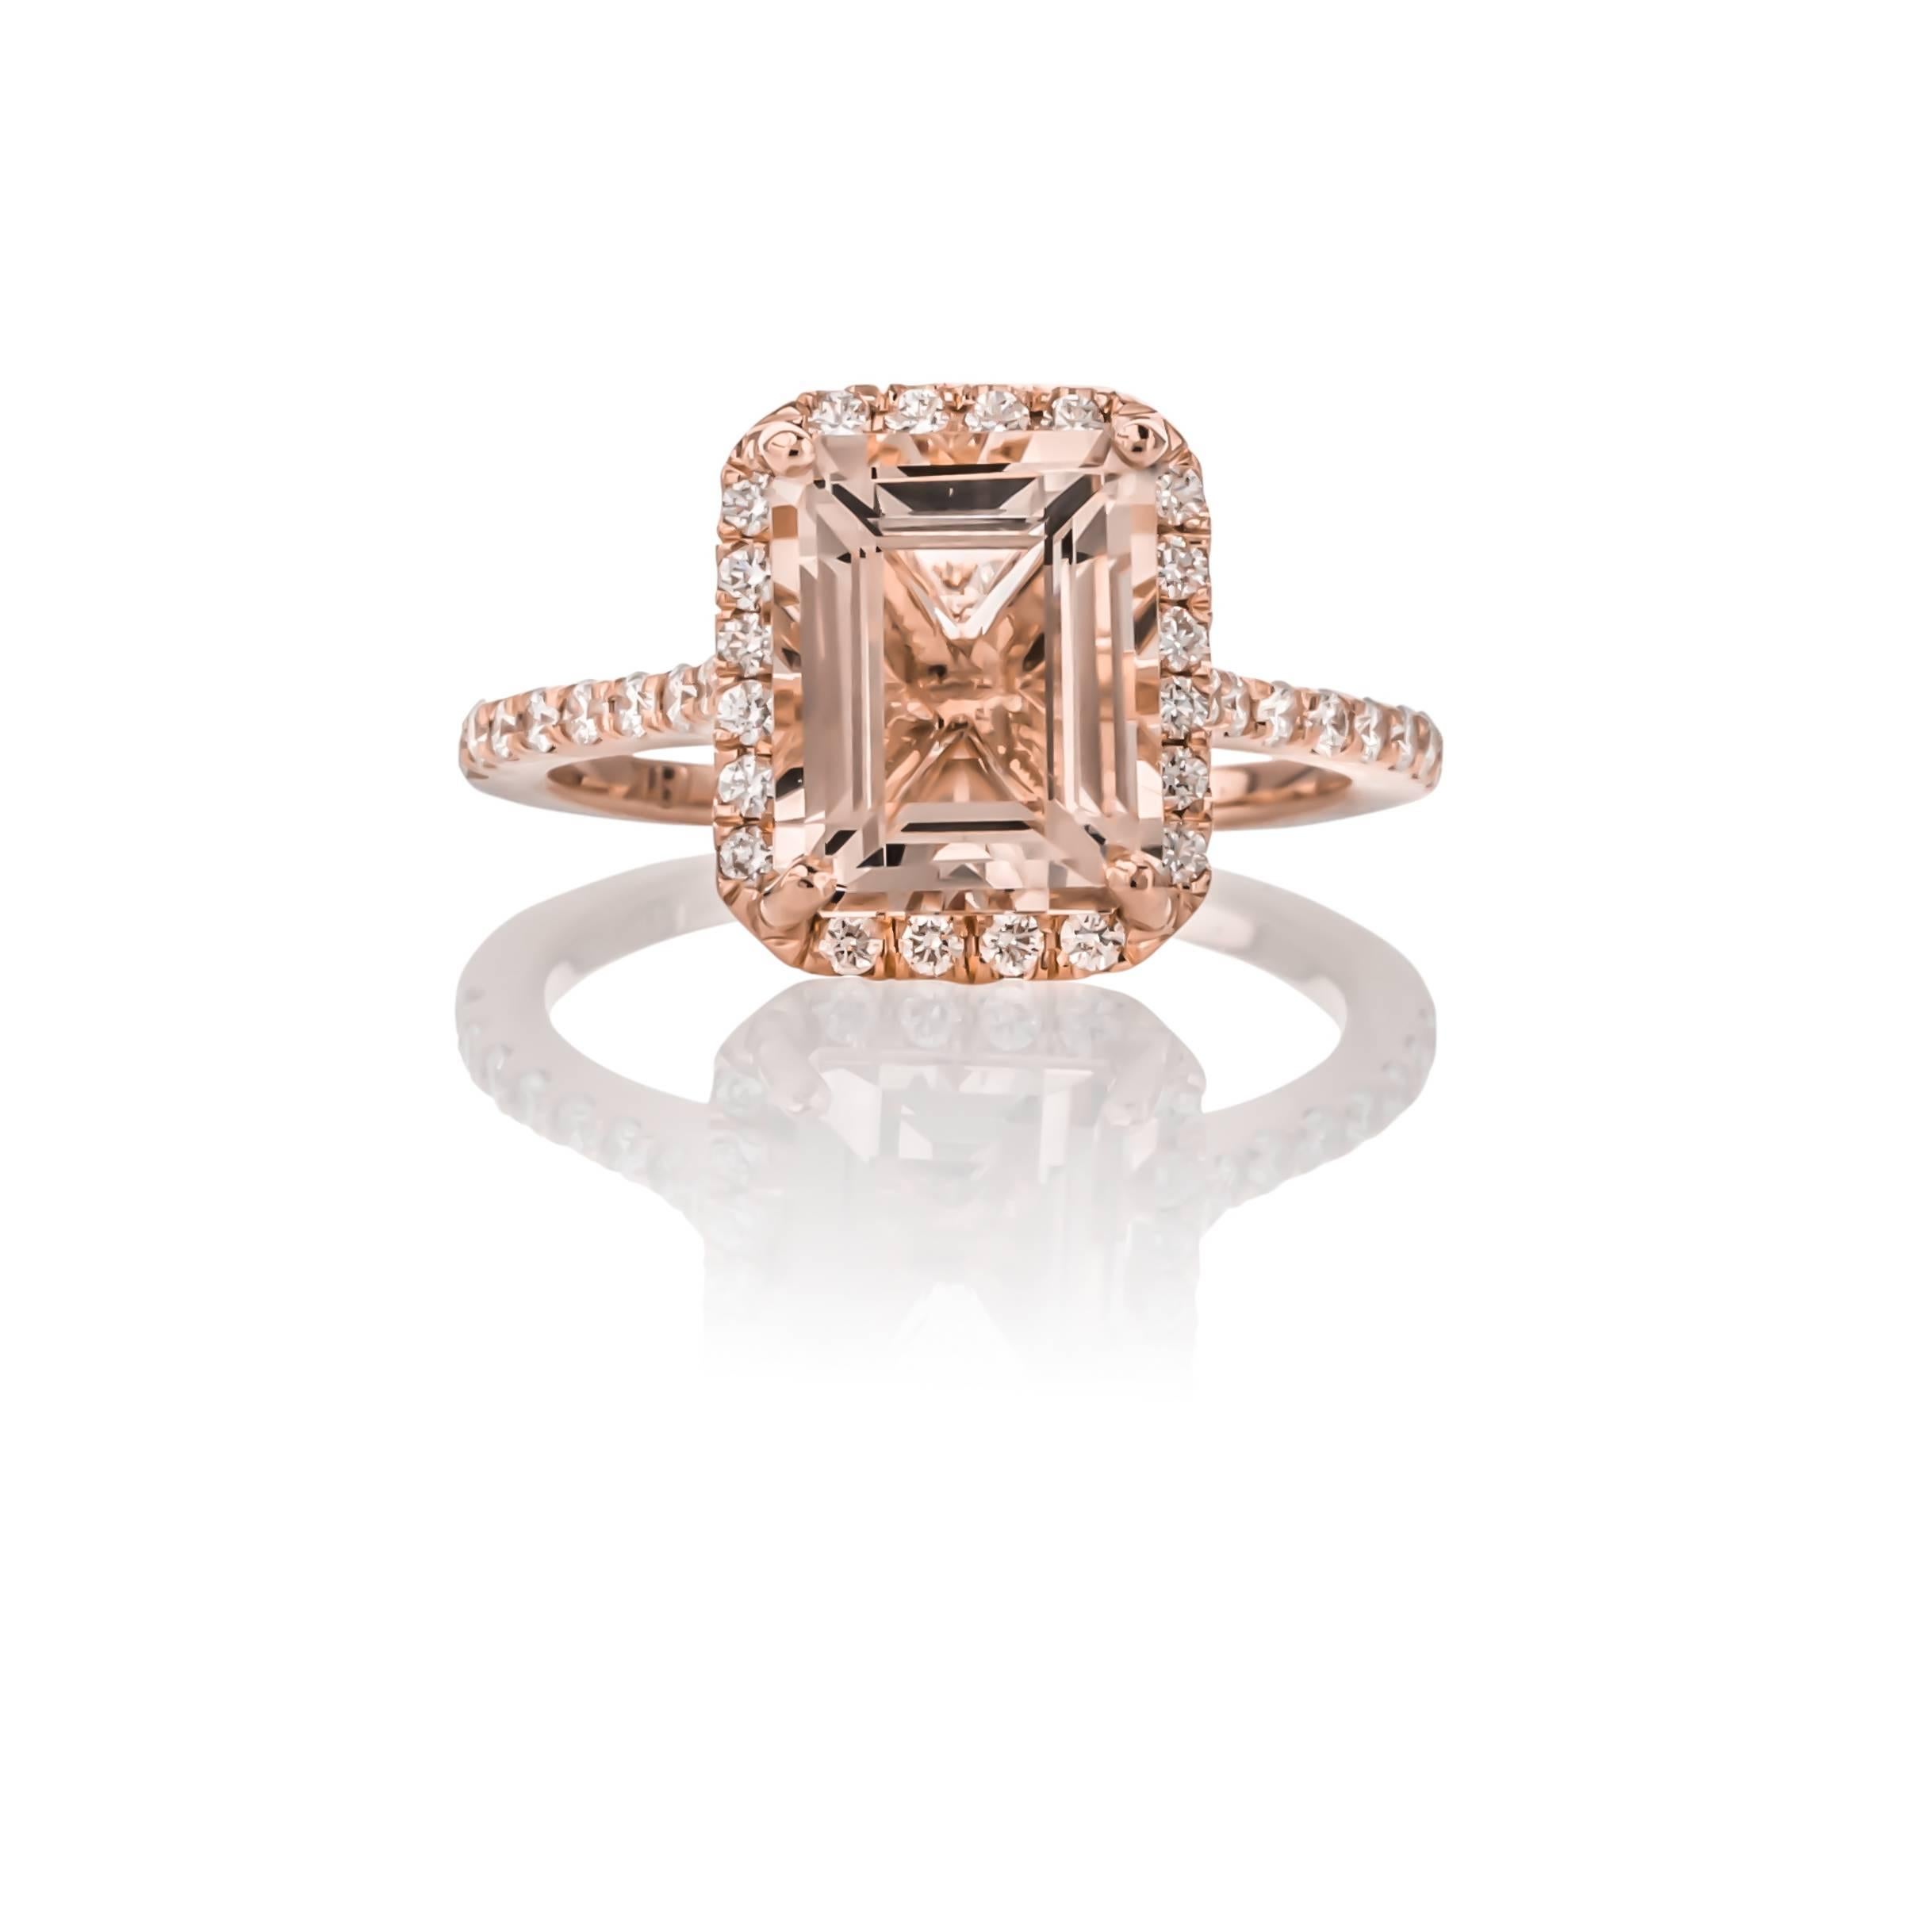 Brand New: One of kind 18K rose gold morganite and diamond ring. Set with one emerald cut morganite weighing 3.58 carats of fine color and clarity, surrounded by forty-six round brilliant cut diamonds weighing .53 carats total weight, G color and VS